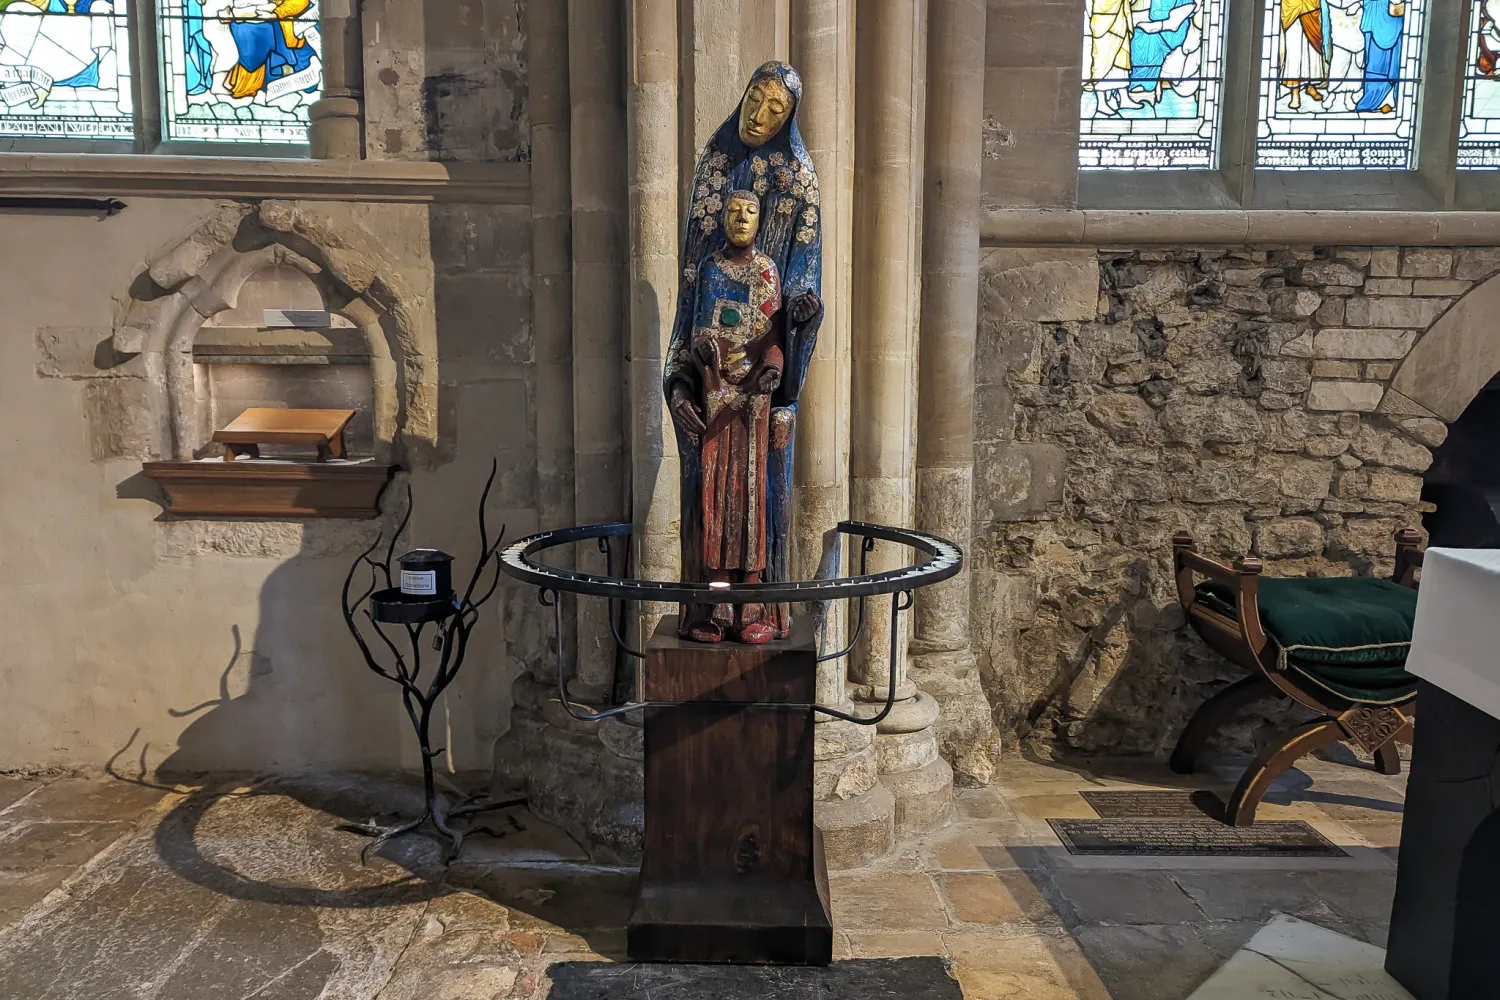 Peter Eugene Ball's sculpture 'Madonna', a statue of Mary with the child jesus at her feet, stands between the Bell and Lady chapel altars on a new, dark wood plinth. The plint is surrounded by a wrought iron circle of prickets for candles.